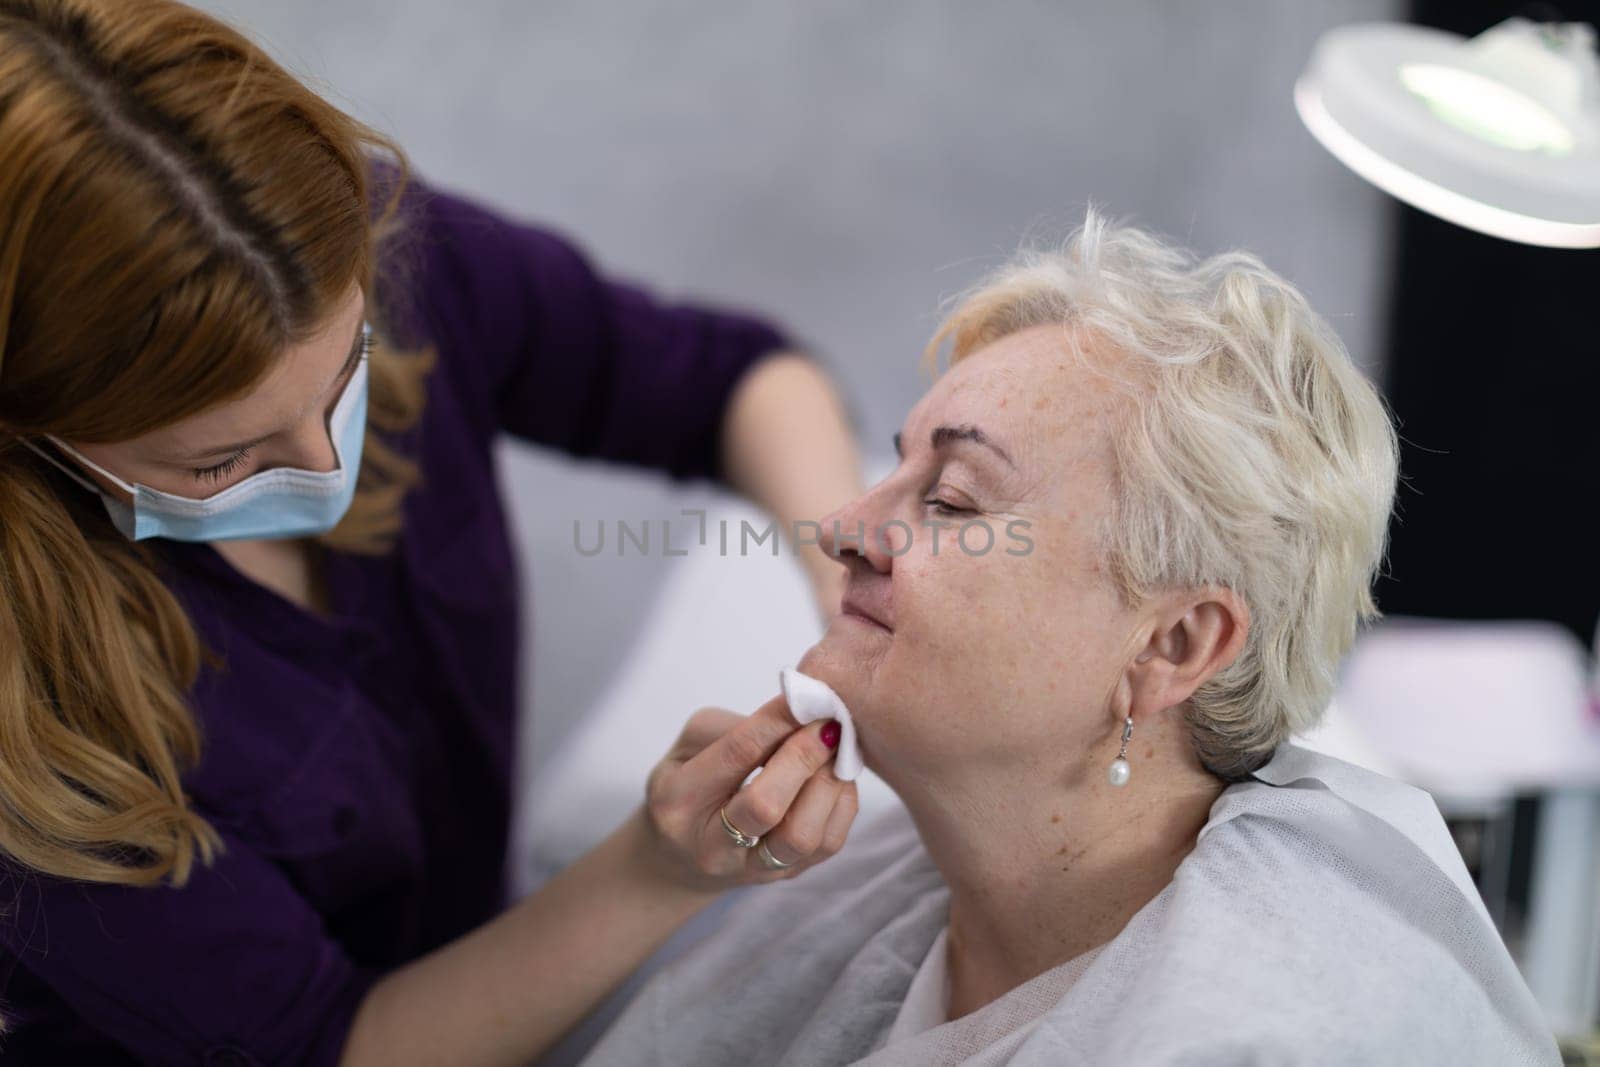 A client of a beauty salon is sitting in the salon. The beautician wipes her client's face with a cosmetic swab.